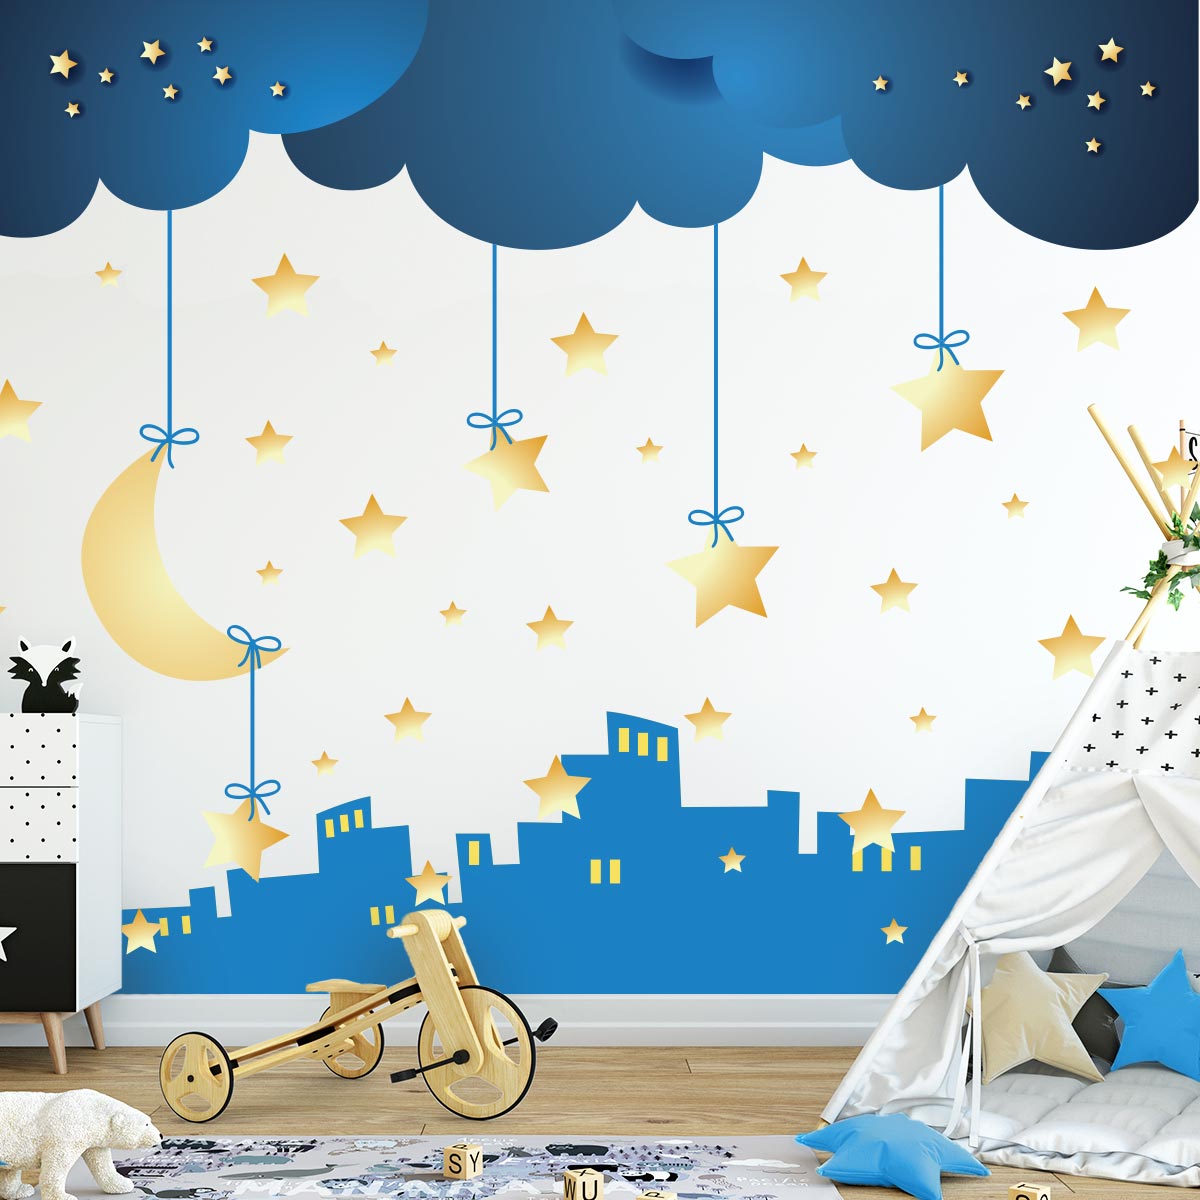 Wall decals stars and clouds in the city